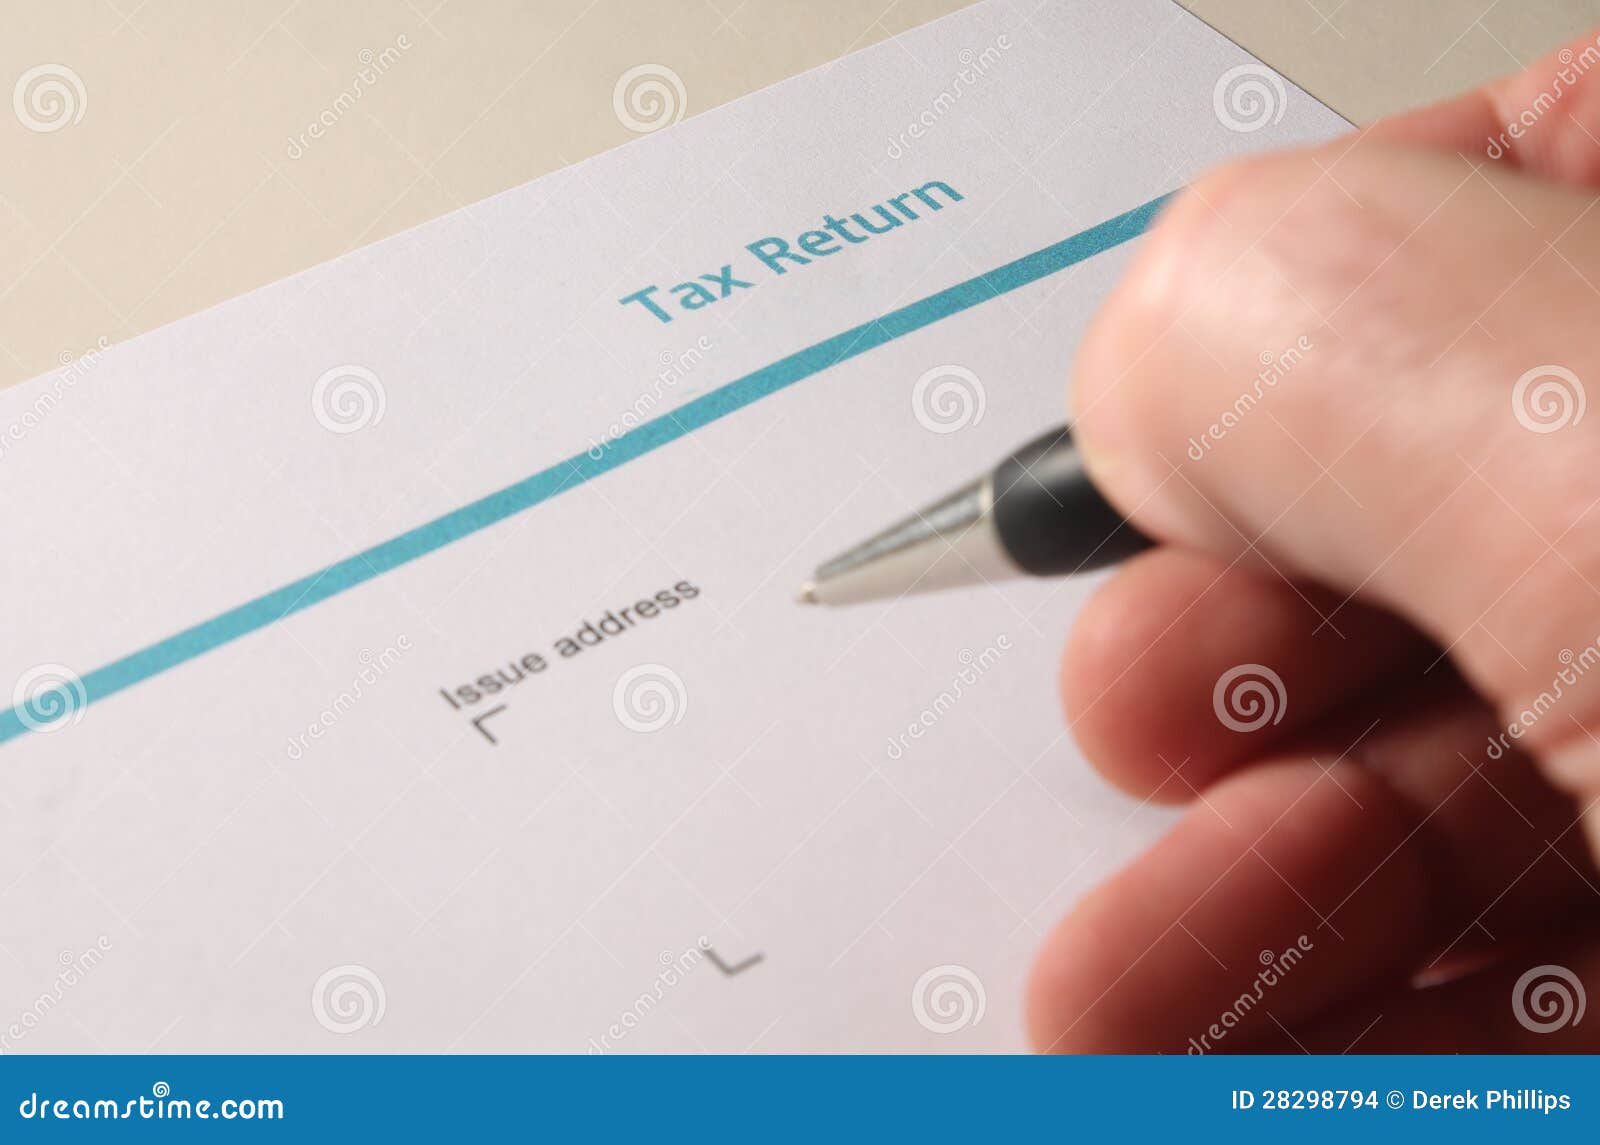 self-assessment-uk-tax-return-form-stock-photo-image-of-completing